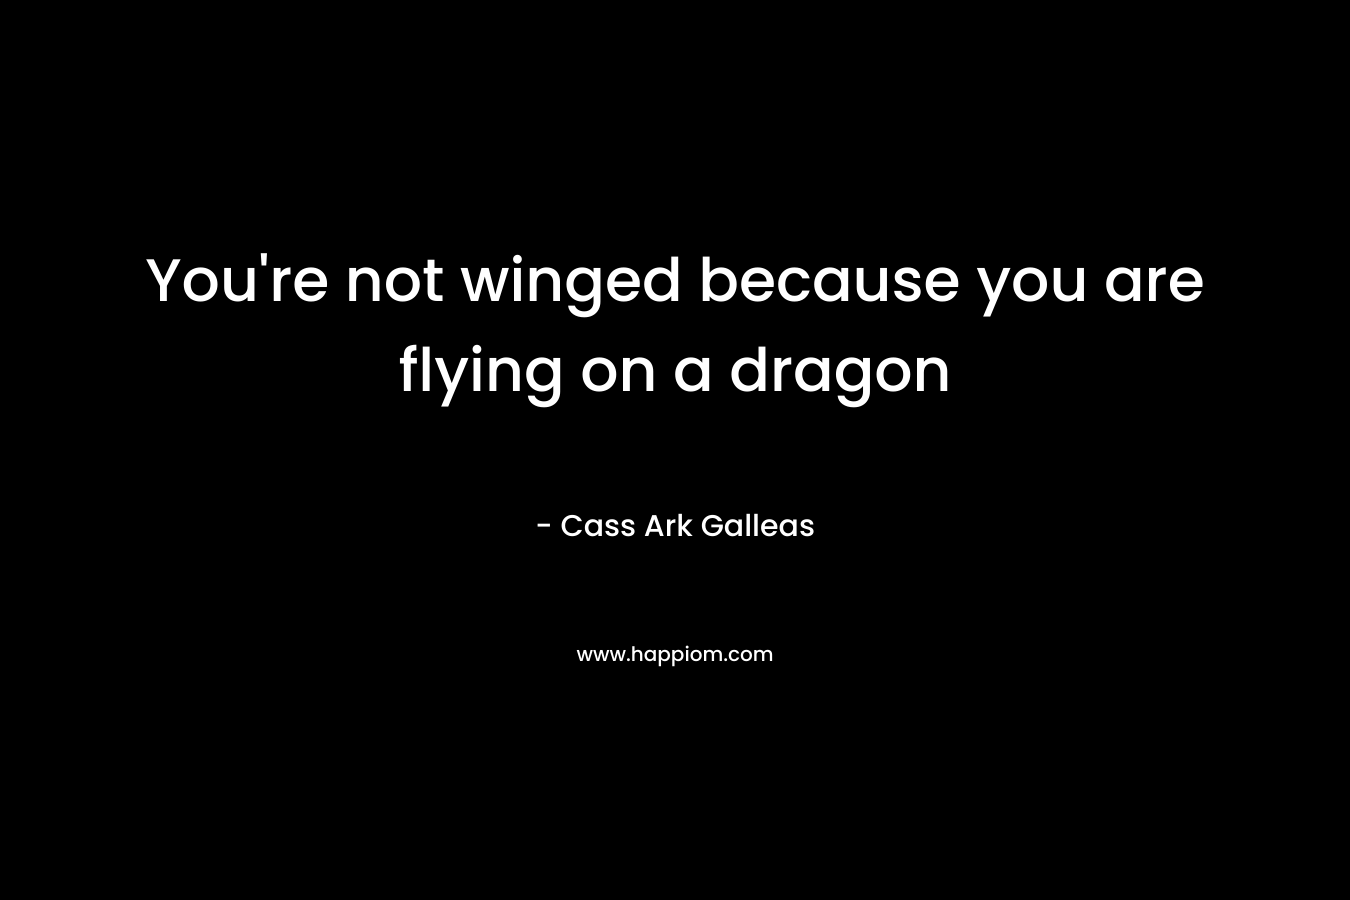 You're not winged because you are flying on a dragon